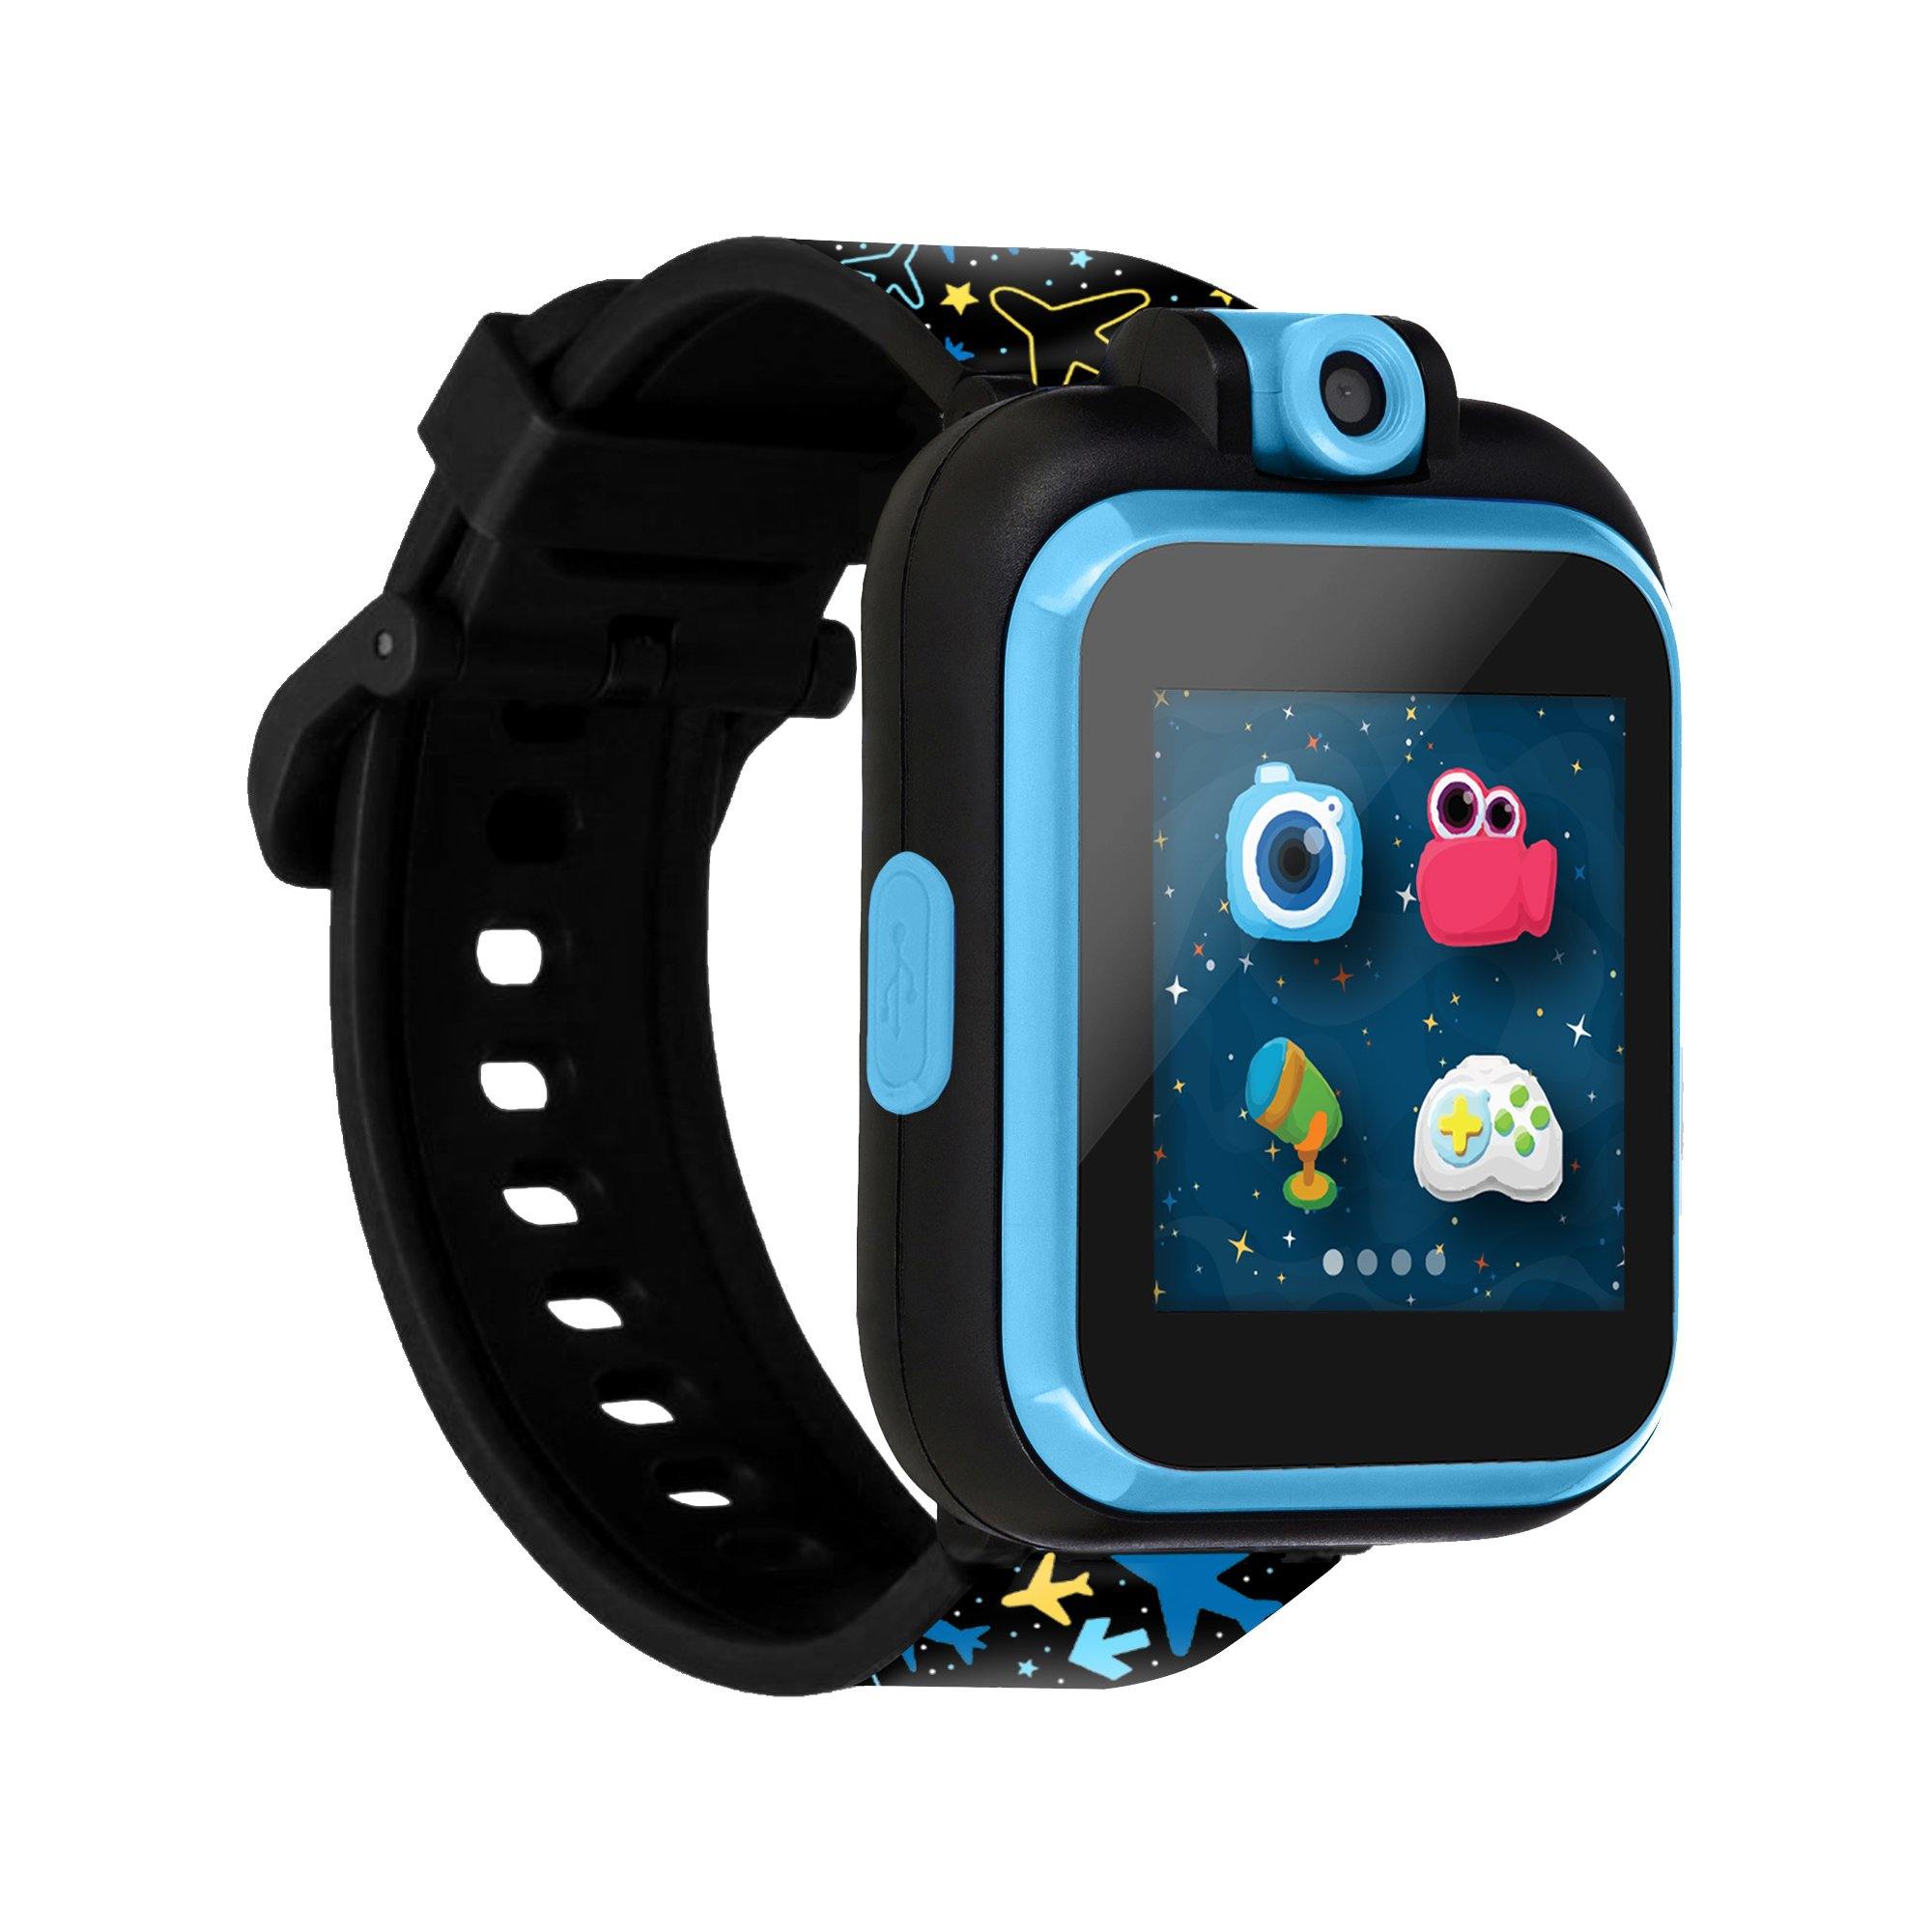 PlayZoom Smartwatch for Kids: Blue Airplanes affordable smart watch